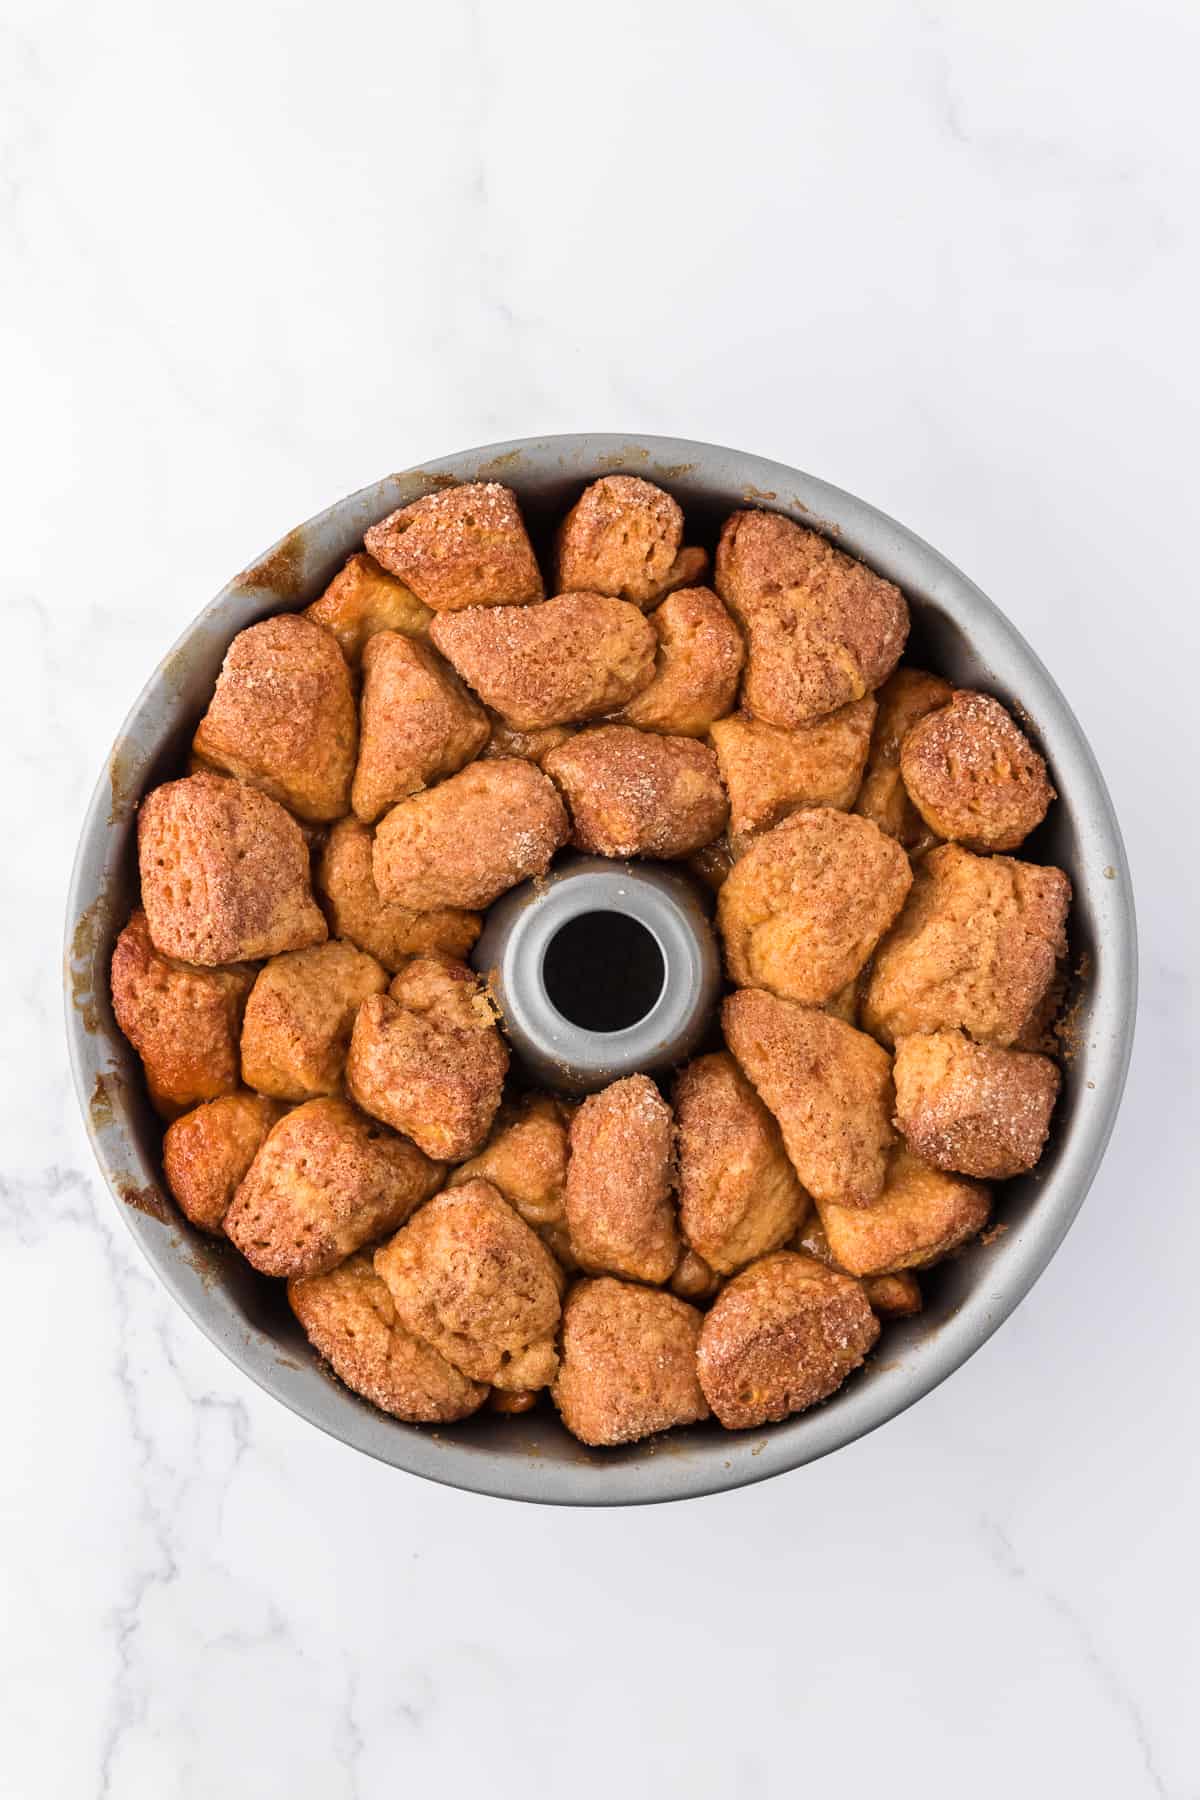 monkey bread in a bundt pan fresh out of the oven